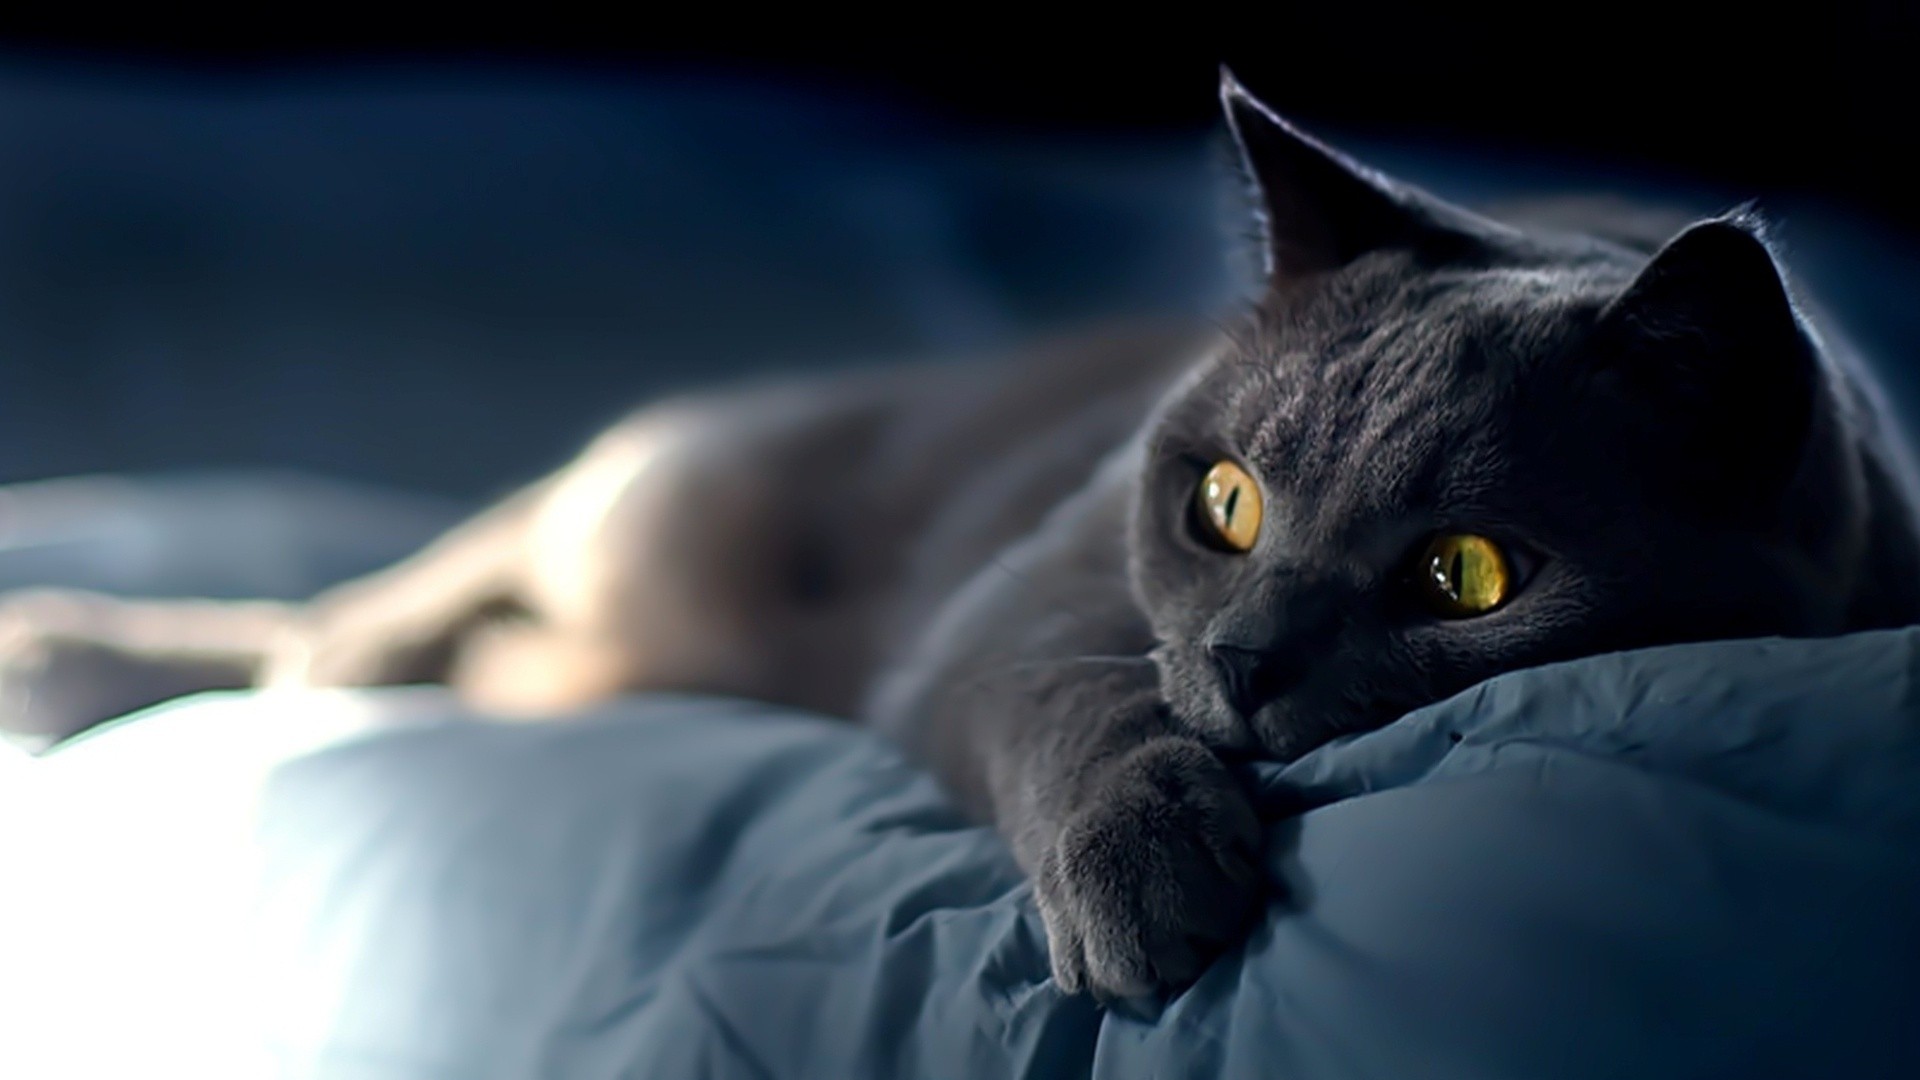 hd wallpapers for pc 1920x1080,cat,small to medium sized cats,felidae,whiskers,chartreux